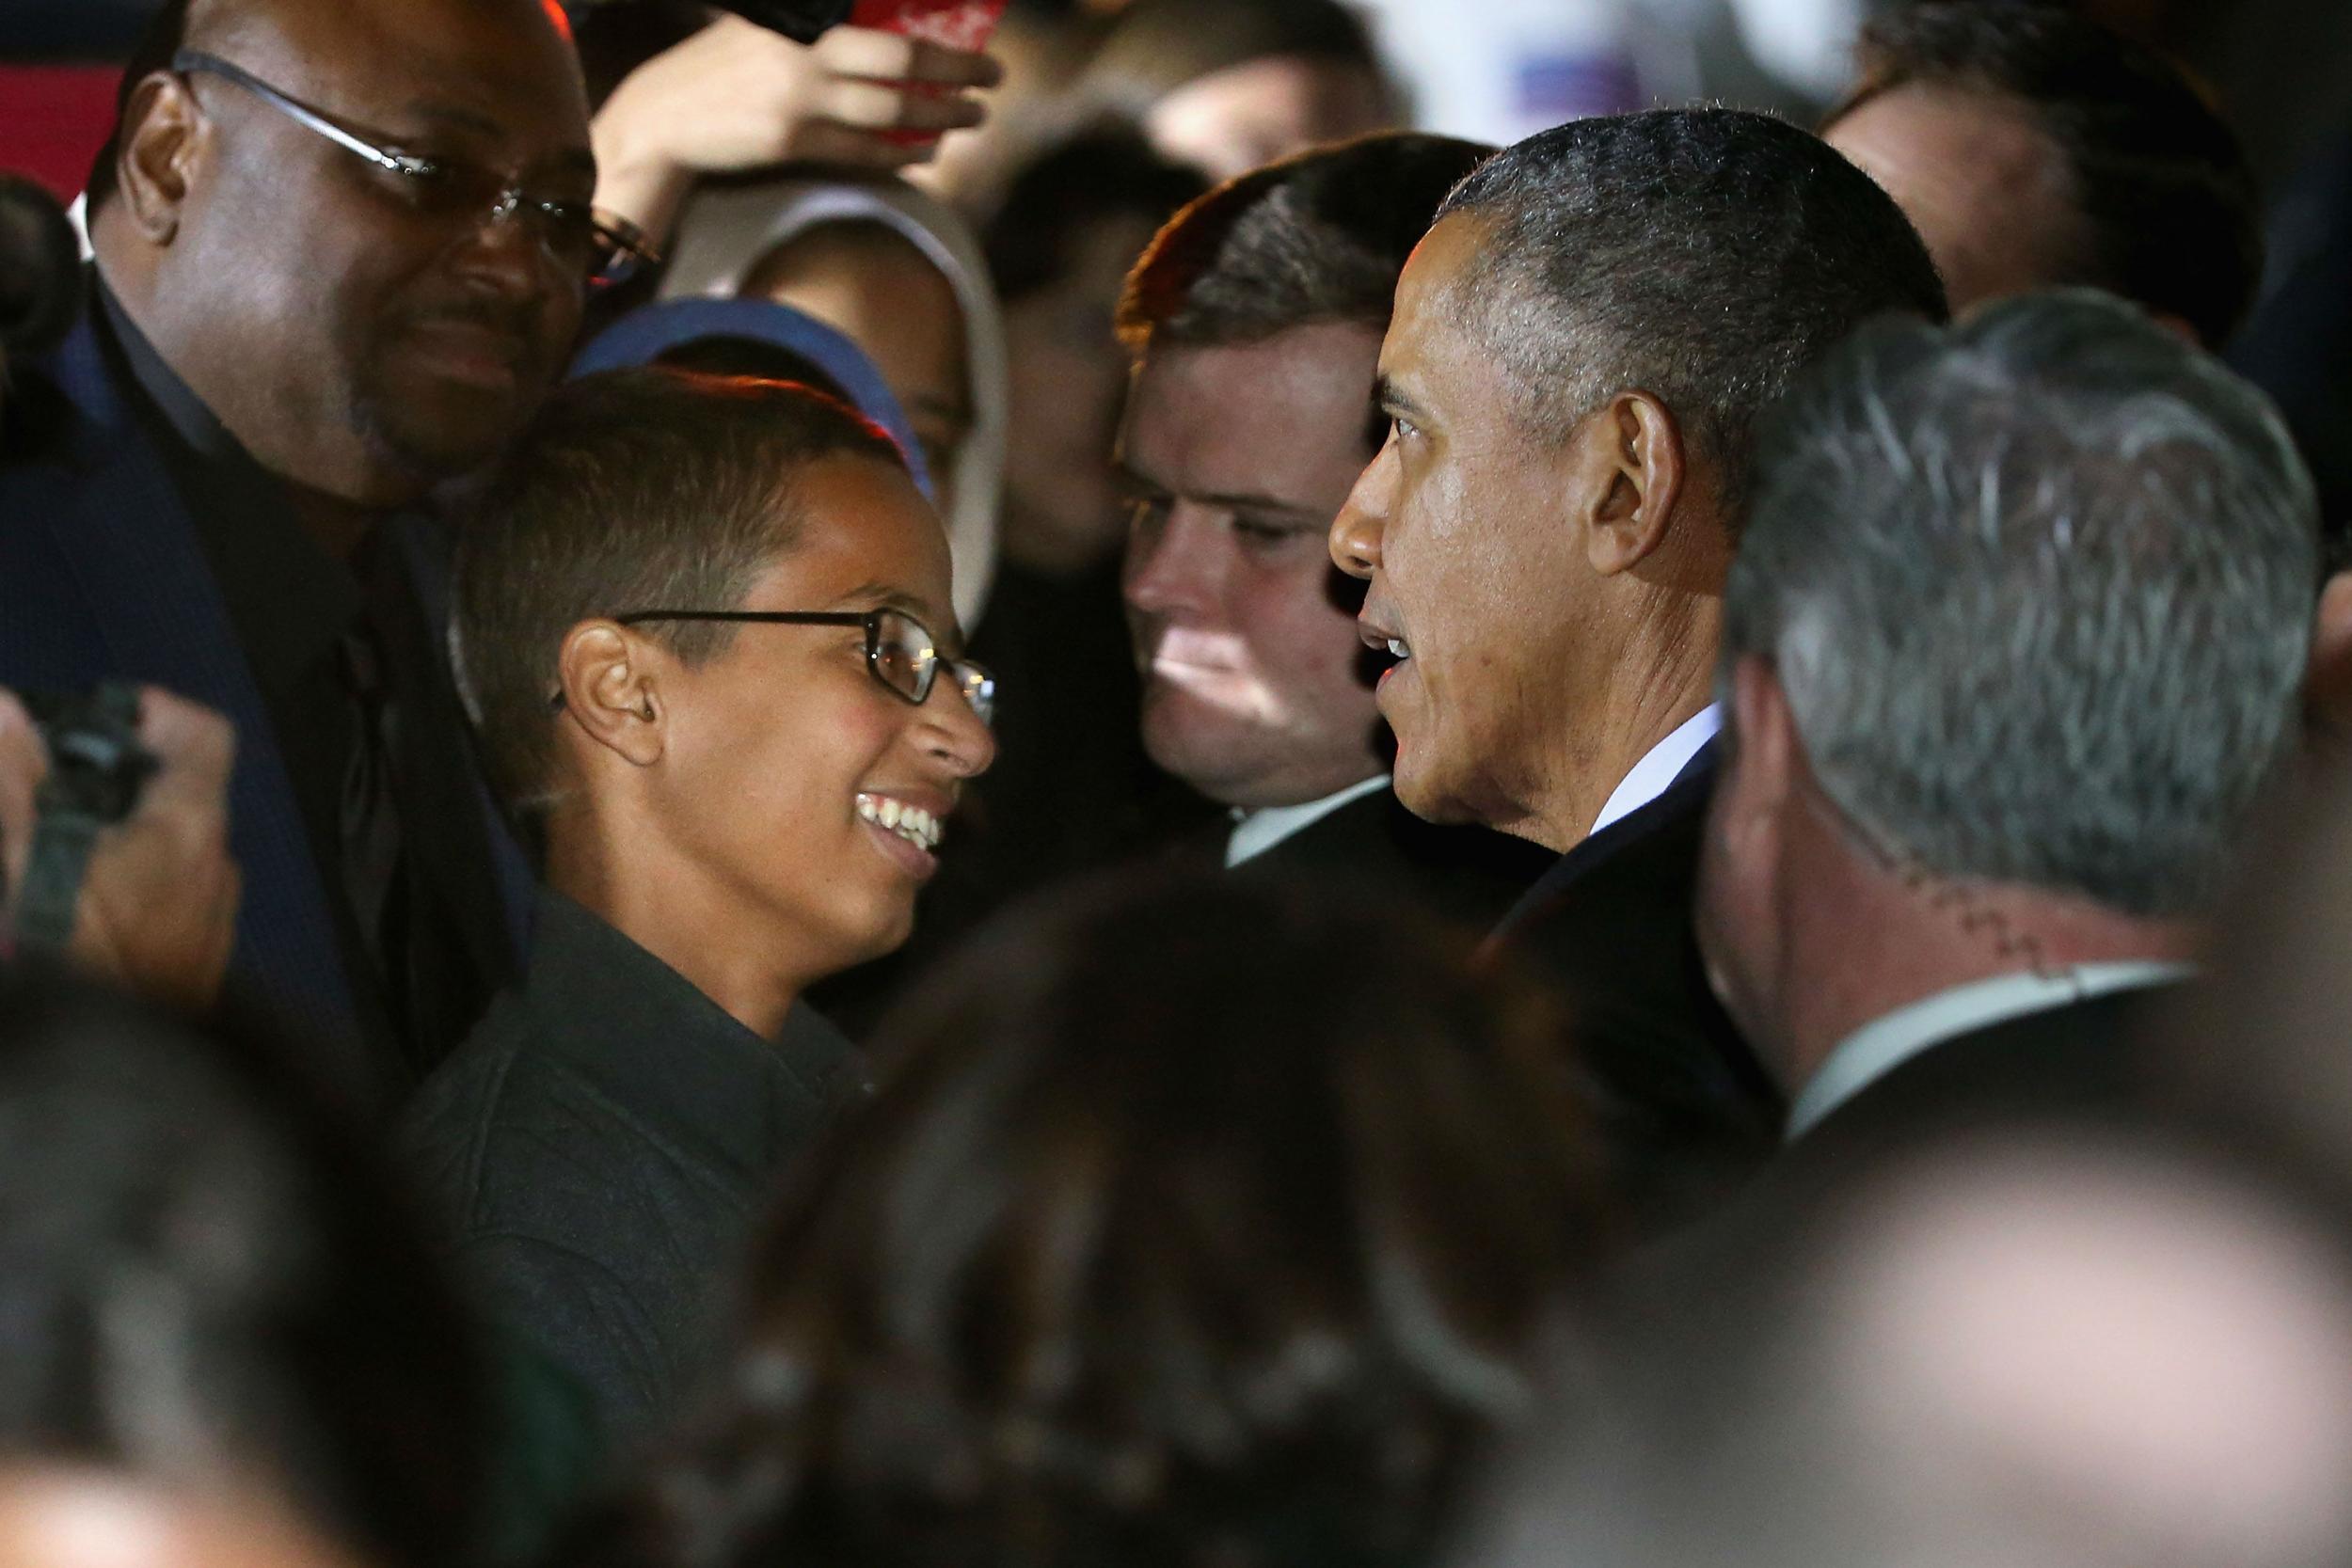 Ahmed Mohamed meets Obama at the White House